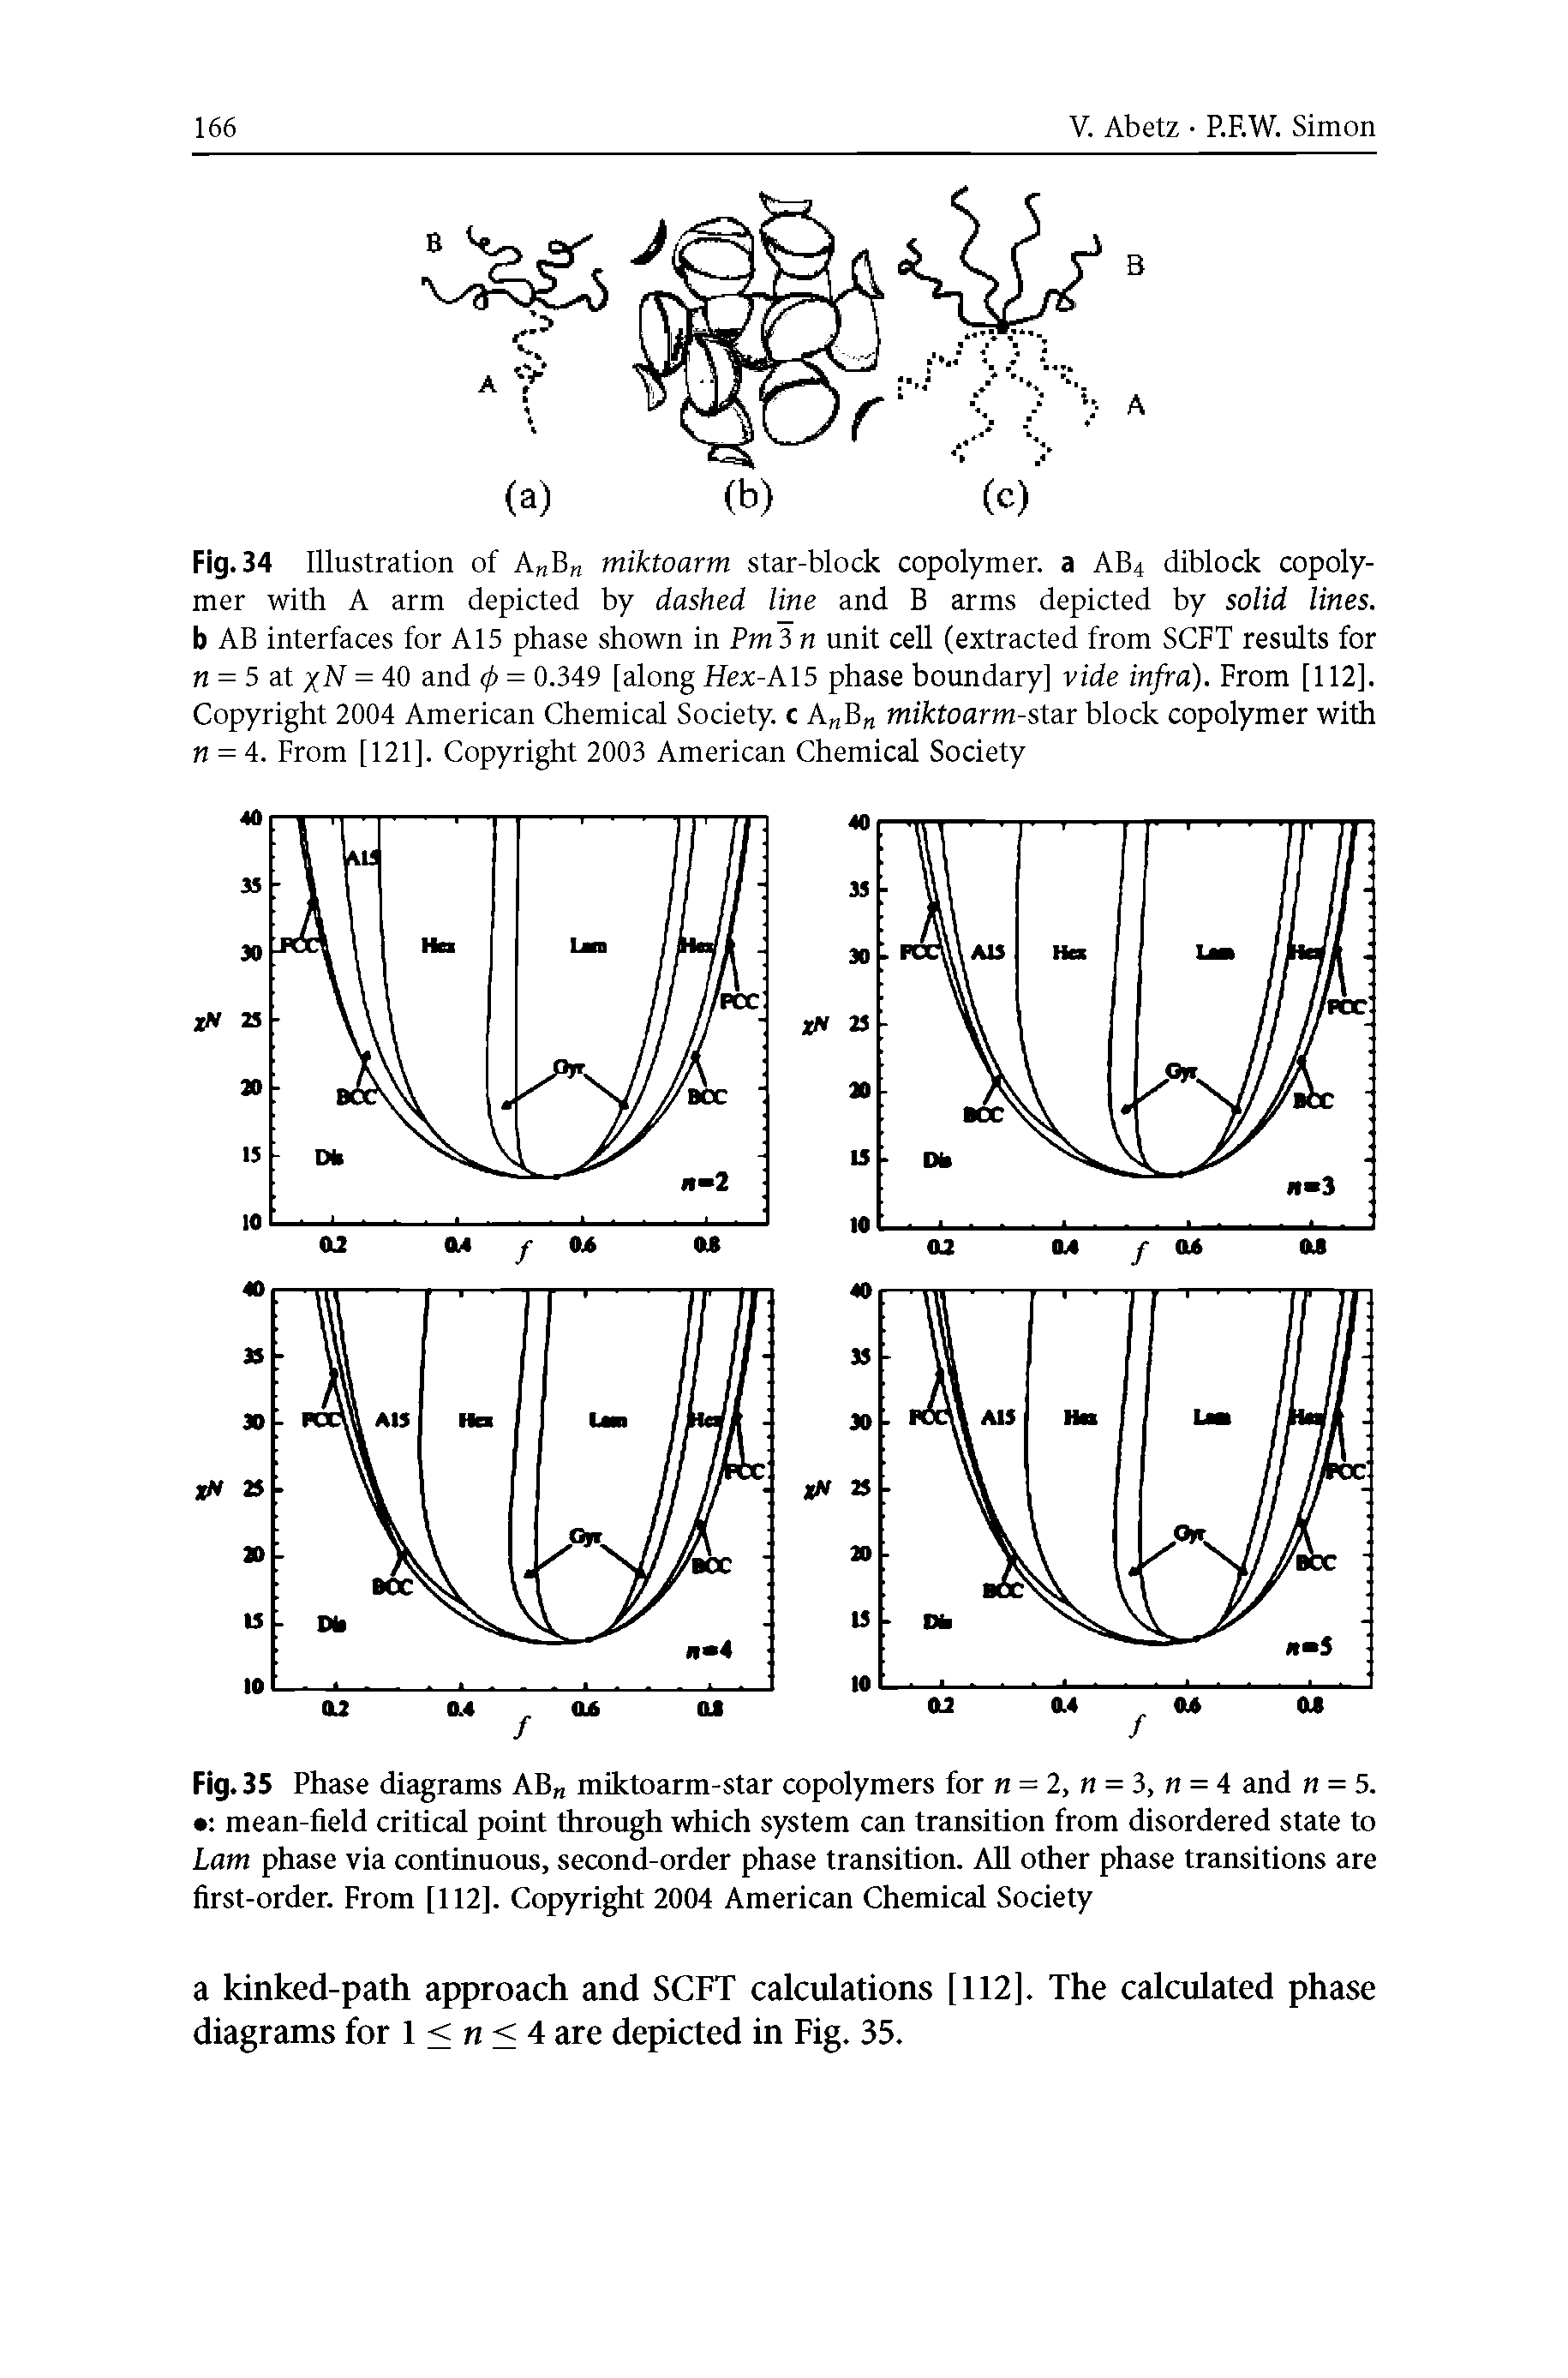 Fig. 35 Phase diagrams AB miktoarm-star copolymers for n = 2, n = 3, n = 4 and n = 5. mean-field critical point through which system can transition from disordered state to Lam phase via continuous, second-order phase transition. All other phase transitions are first-order. From [112]. Copyright 2004 American Chemical Society...